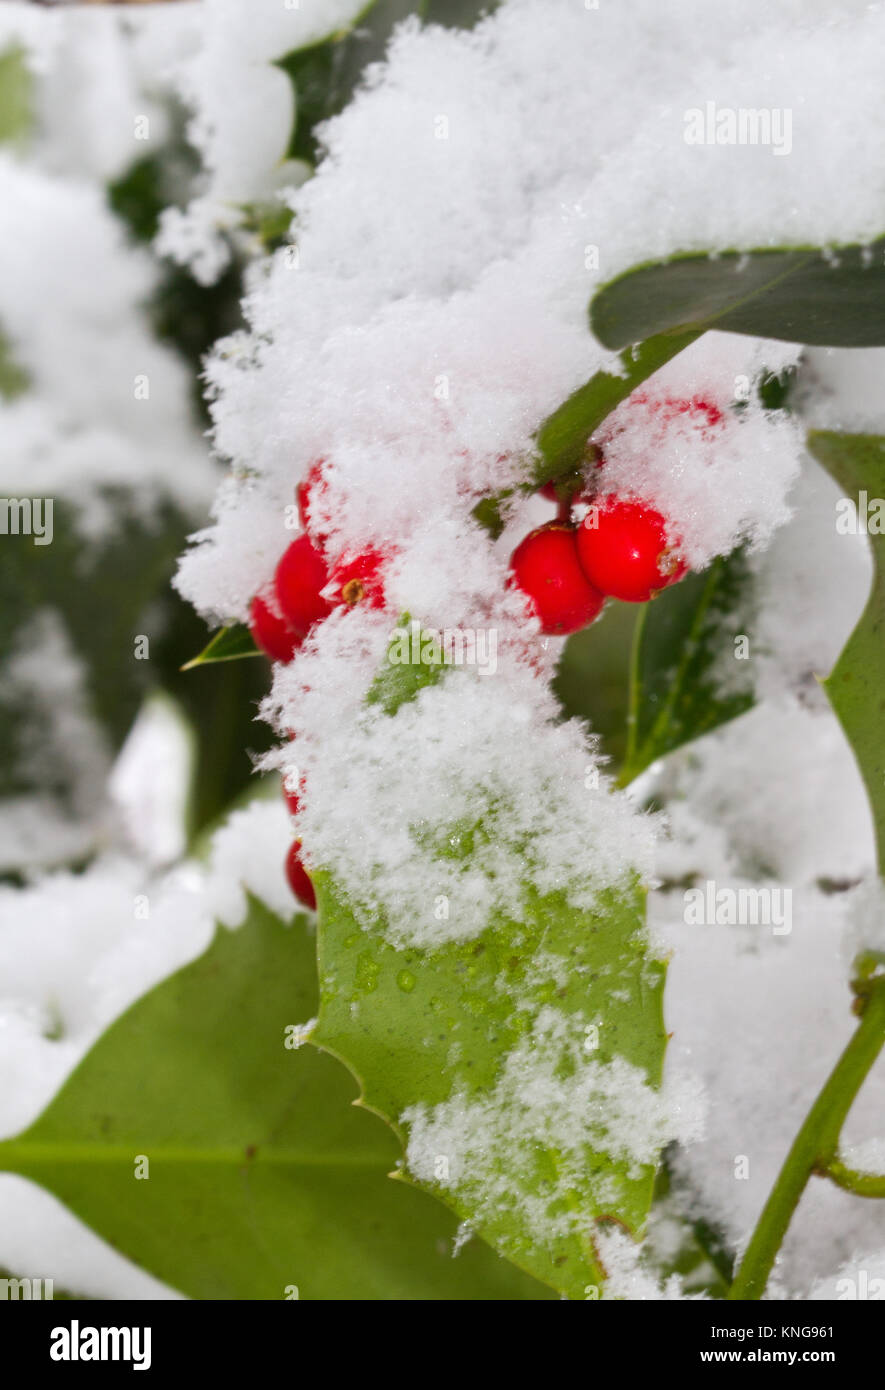 Leathery, spiny leaves and berries of Holly, covered with snow Stock Photo